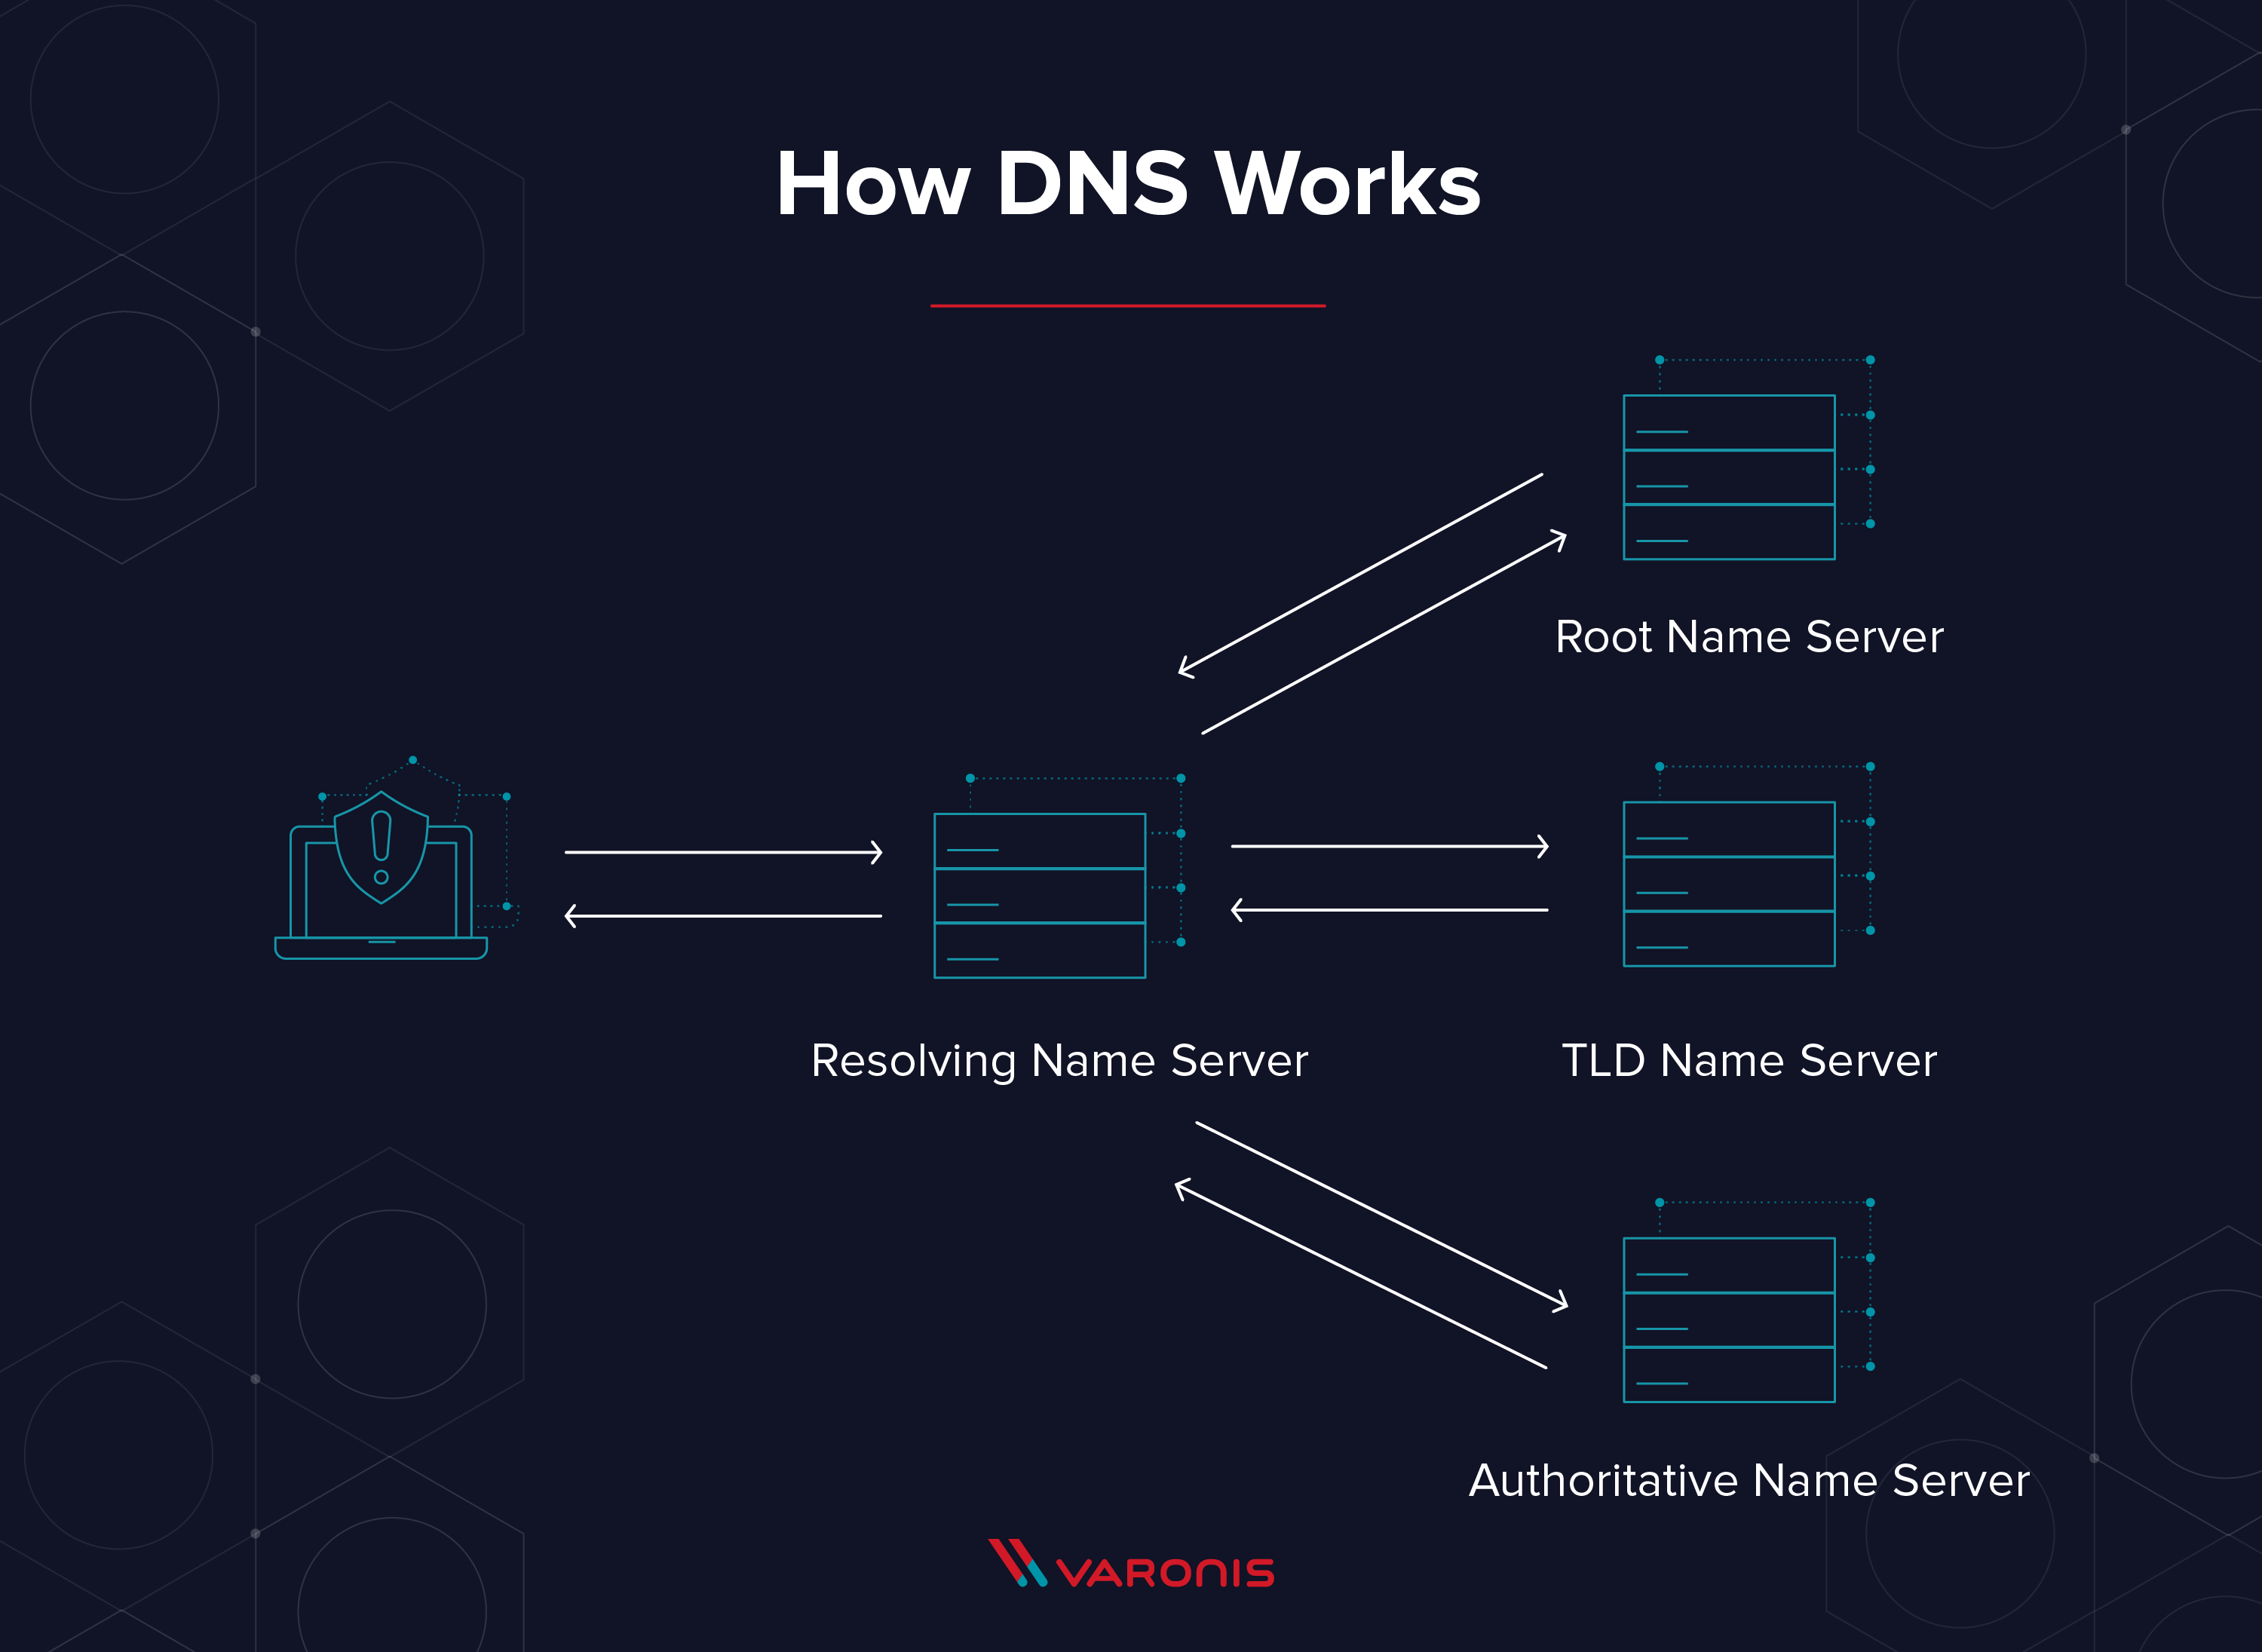 Nom : how-dns-works@2x-1.png
Affichages : 49
Taille : 144,3 Ko